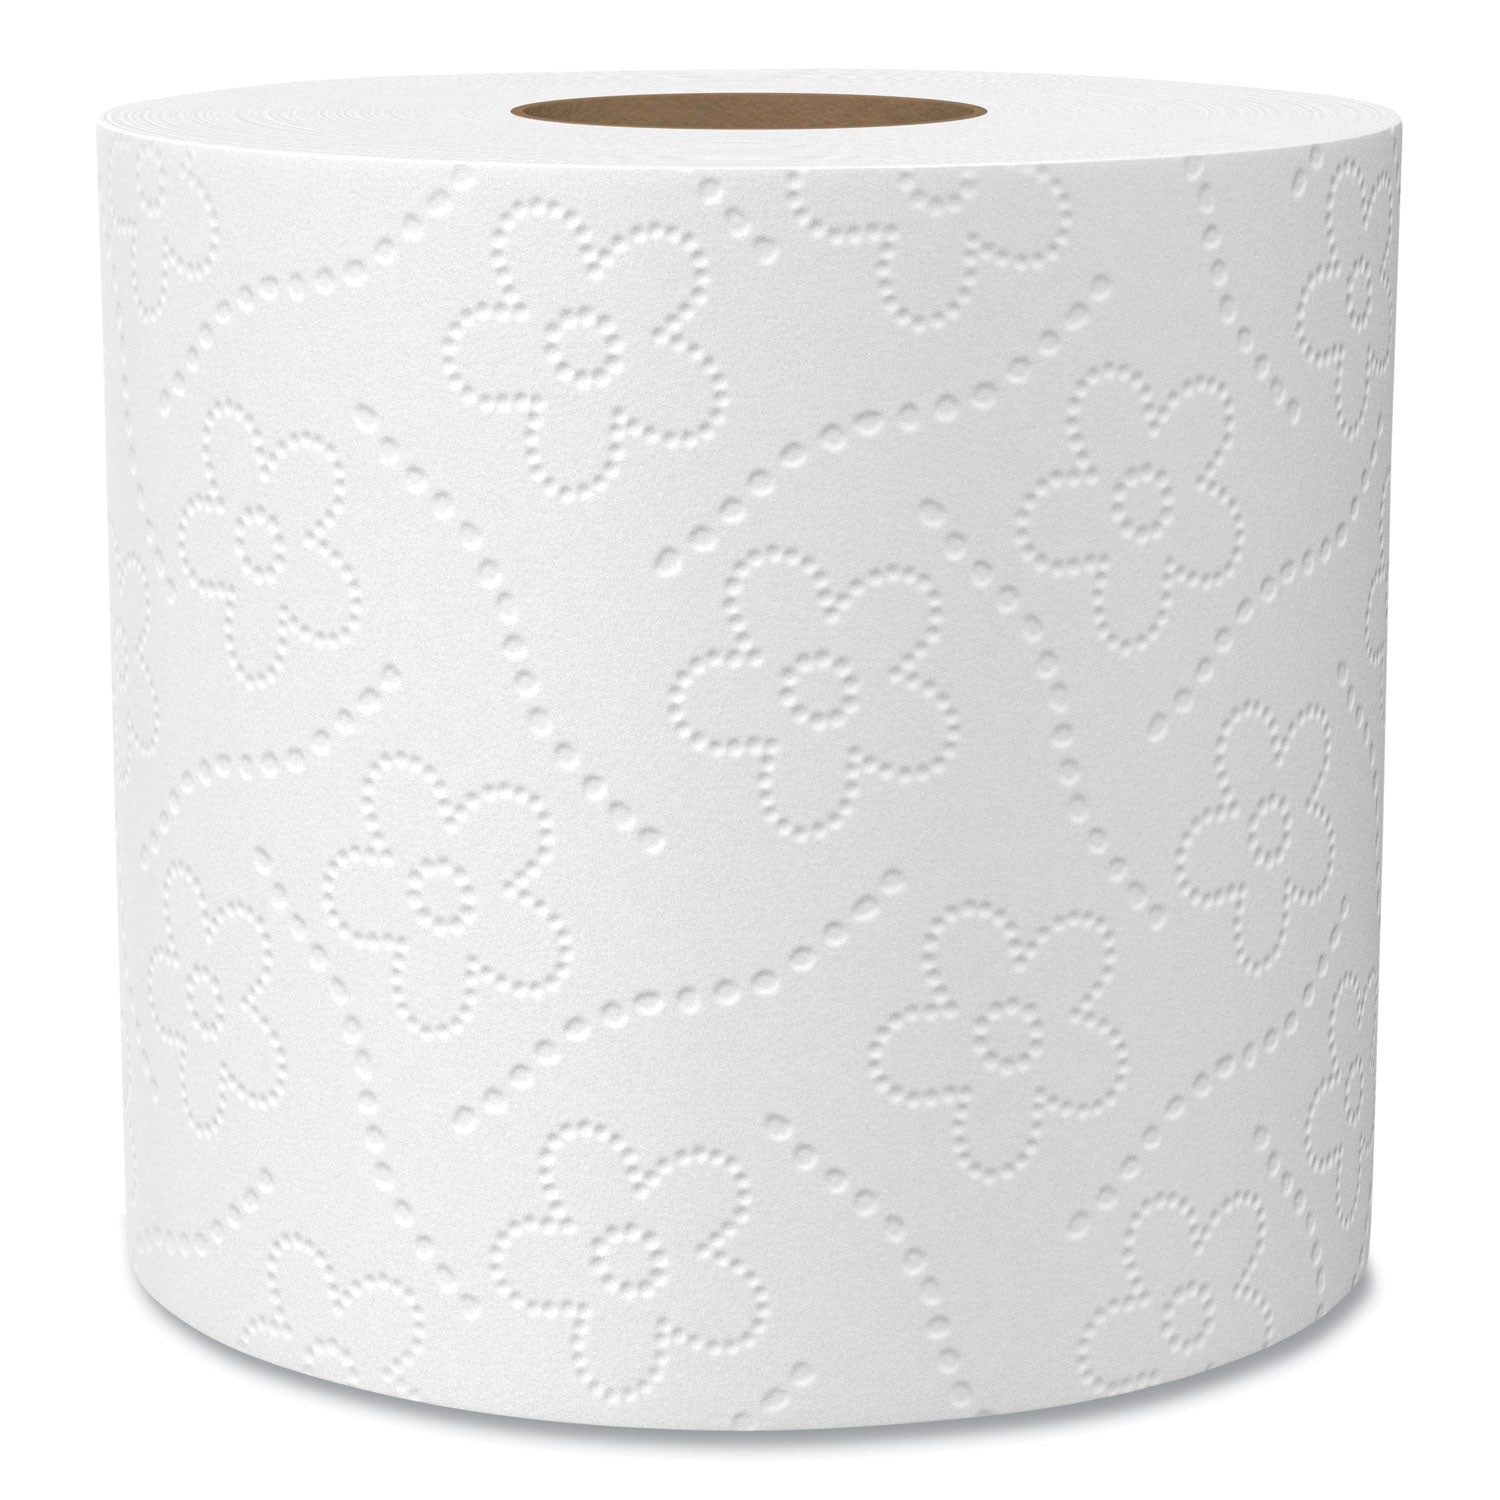 100% Recycled Bathroom Tissue, Septic Safe, 2-Ply, White, 240 Sheets/Roll, 24/Pack - 